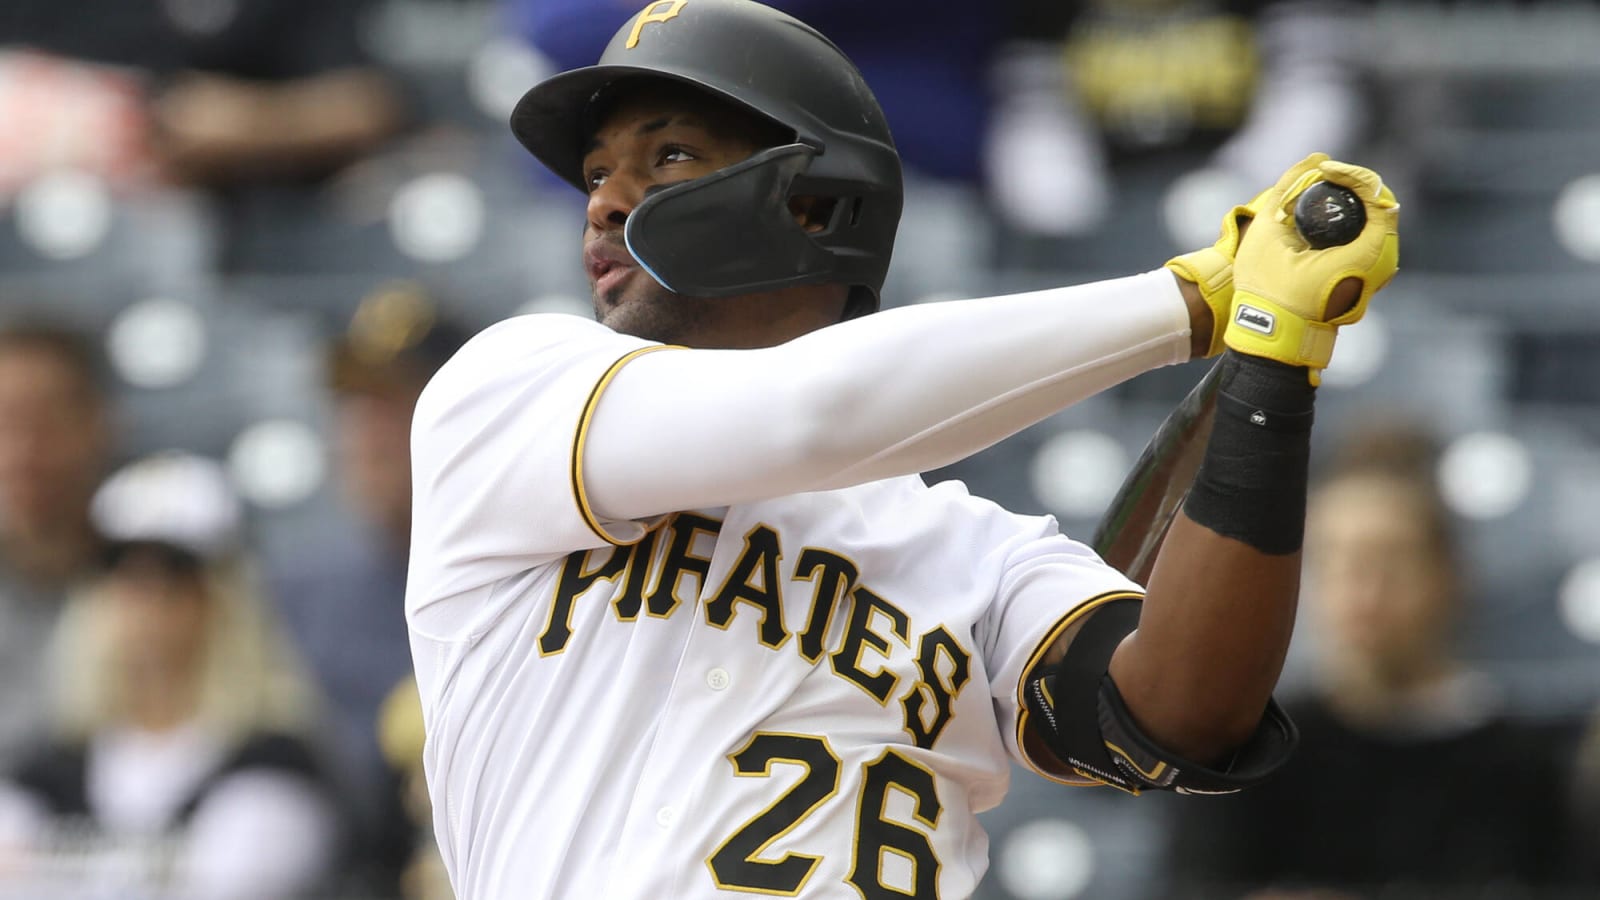 Pirates Select Miguel Andujar from Triple-A; Transfer Wil Crowe to 60-Day